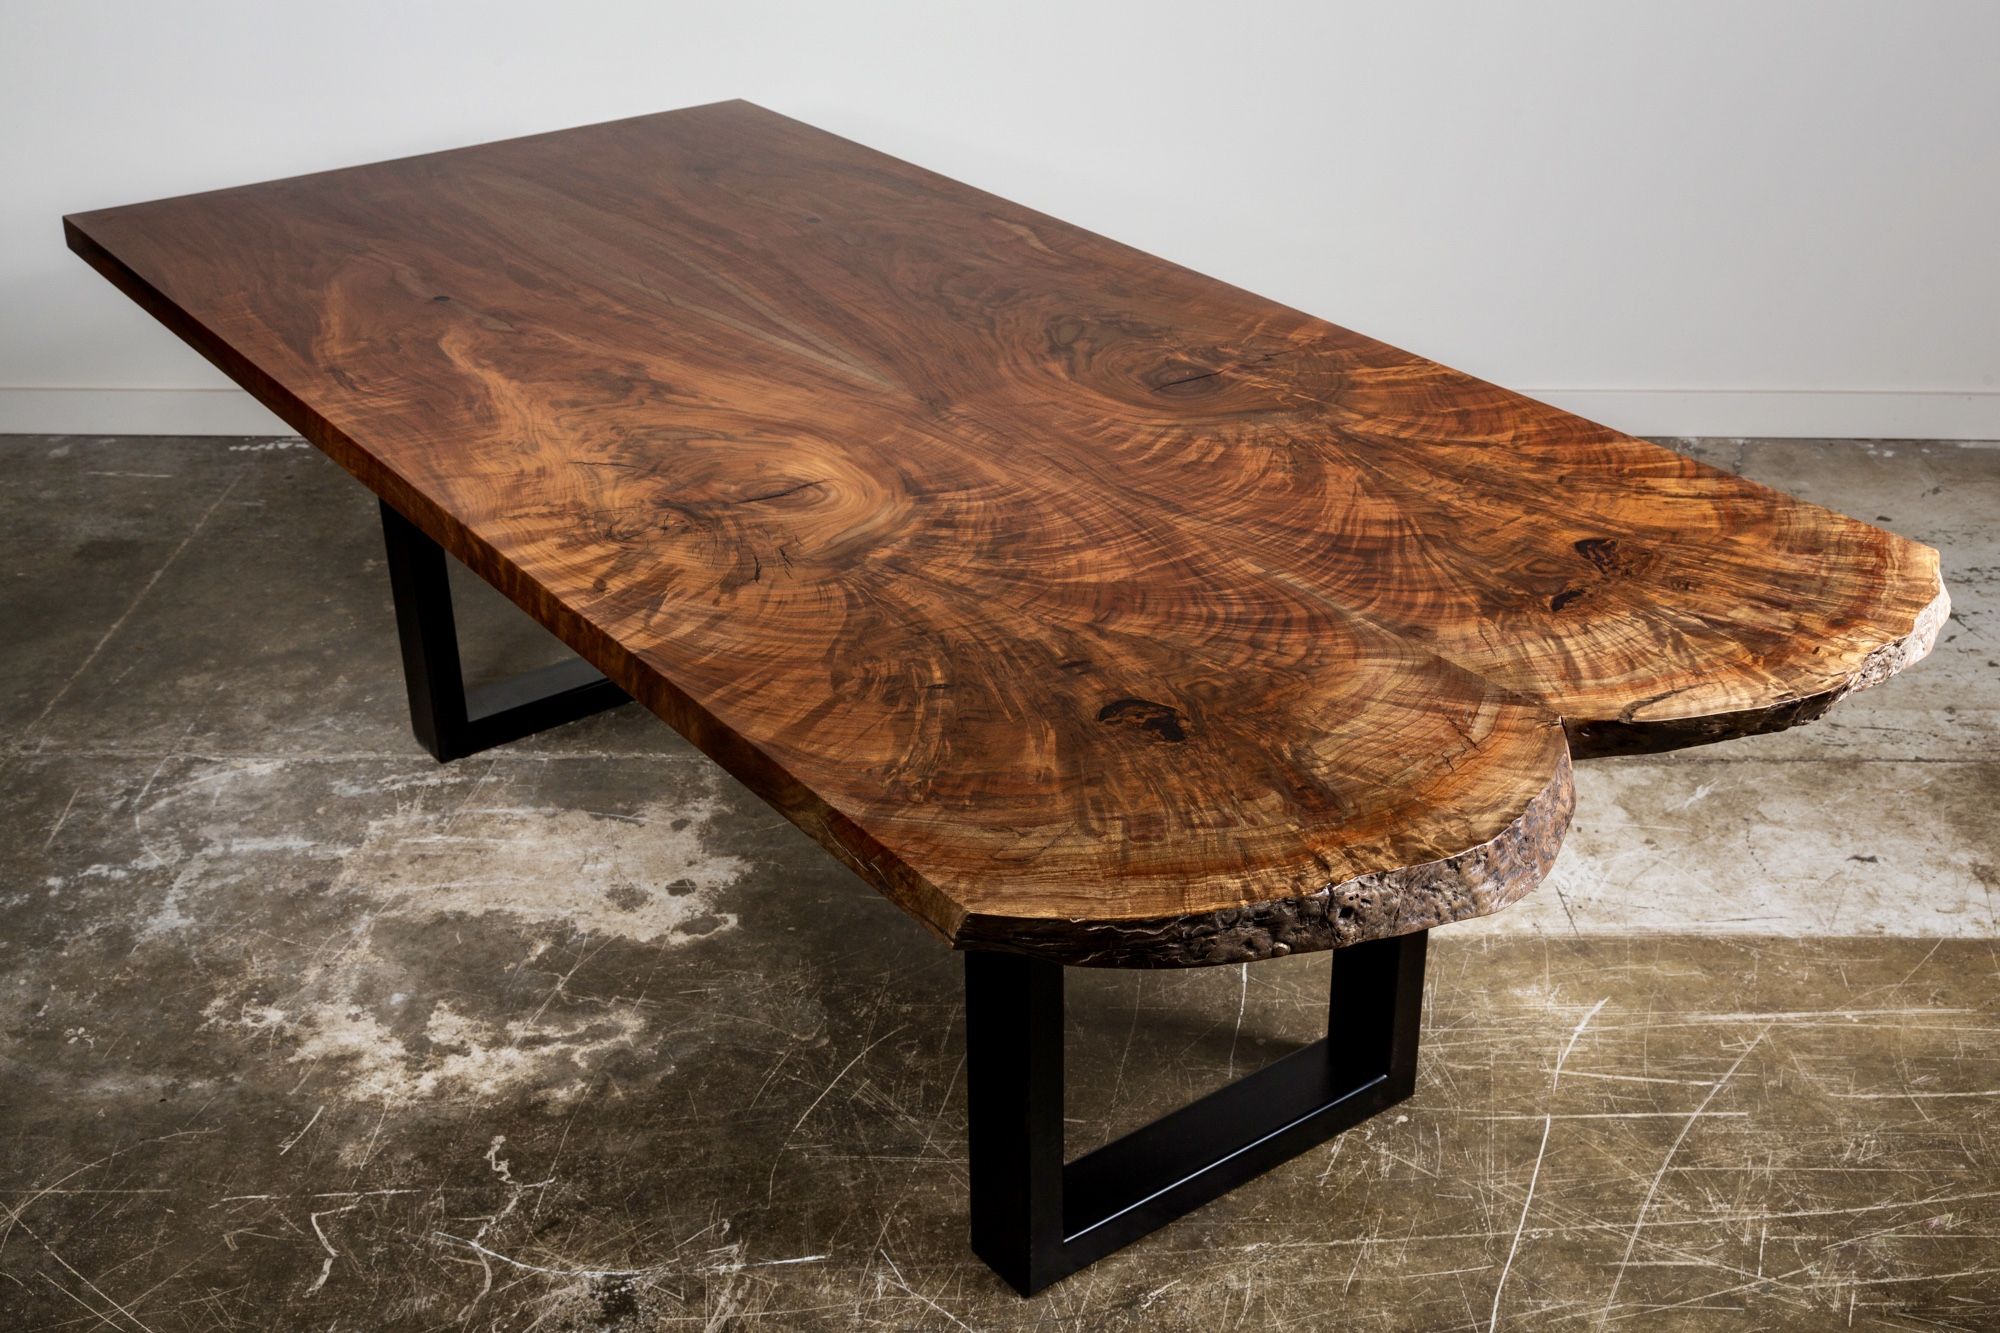 City Trees Furniture | Bookmatched Walnut Dining Table, 91″ Intended For Current Black And Walnut Dining Tables (View 9 of 15)